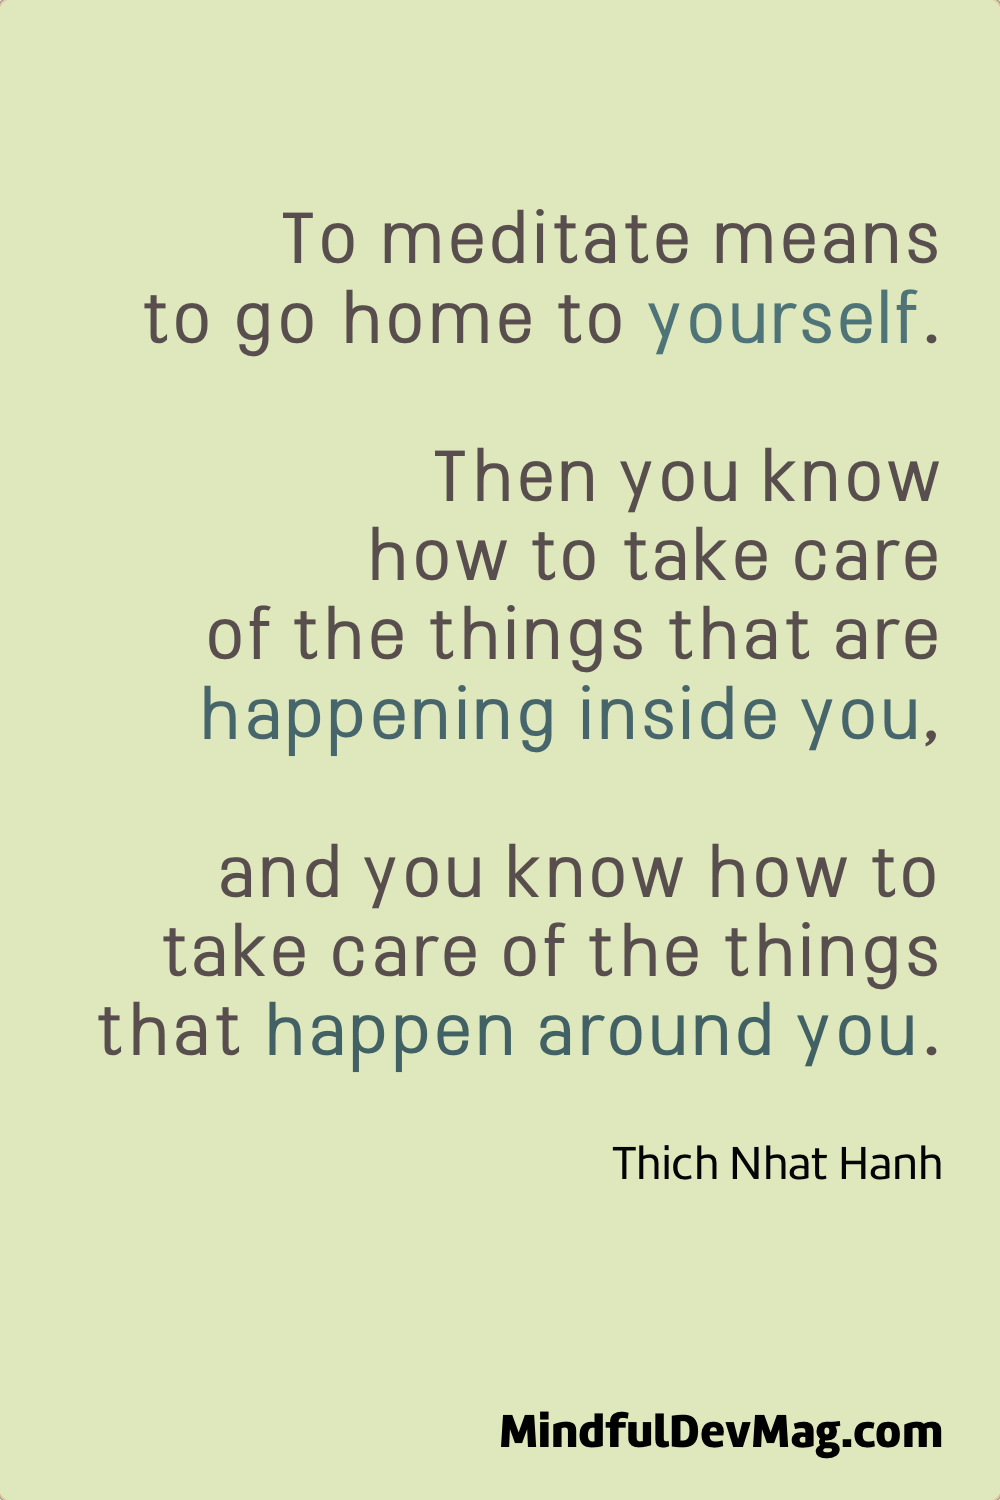 Mindful quote: To meditate means to go home to yourself. Then you know how to take care of the things that are happening inside you, and you know how to take care of the things that happen around you. - Thich Nhat Hanh